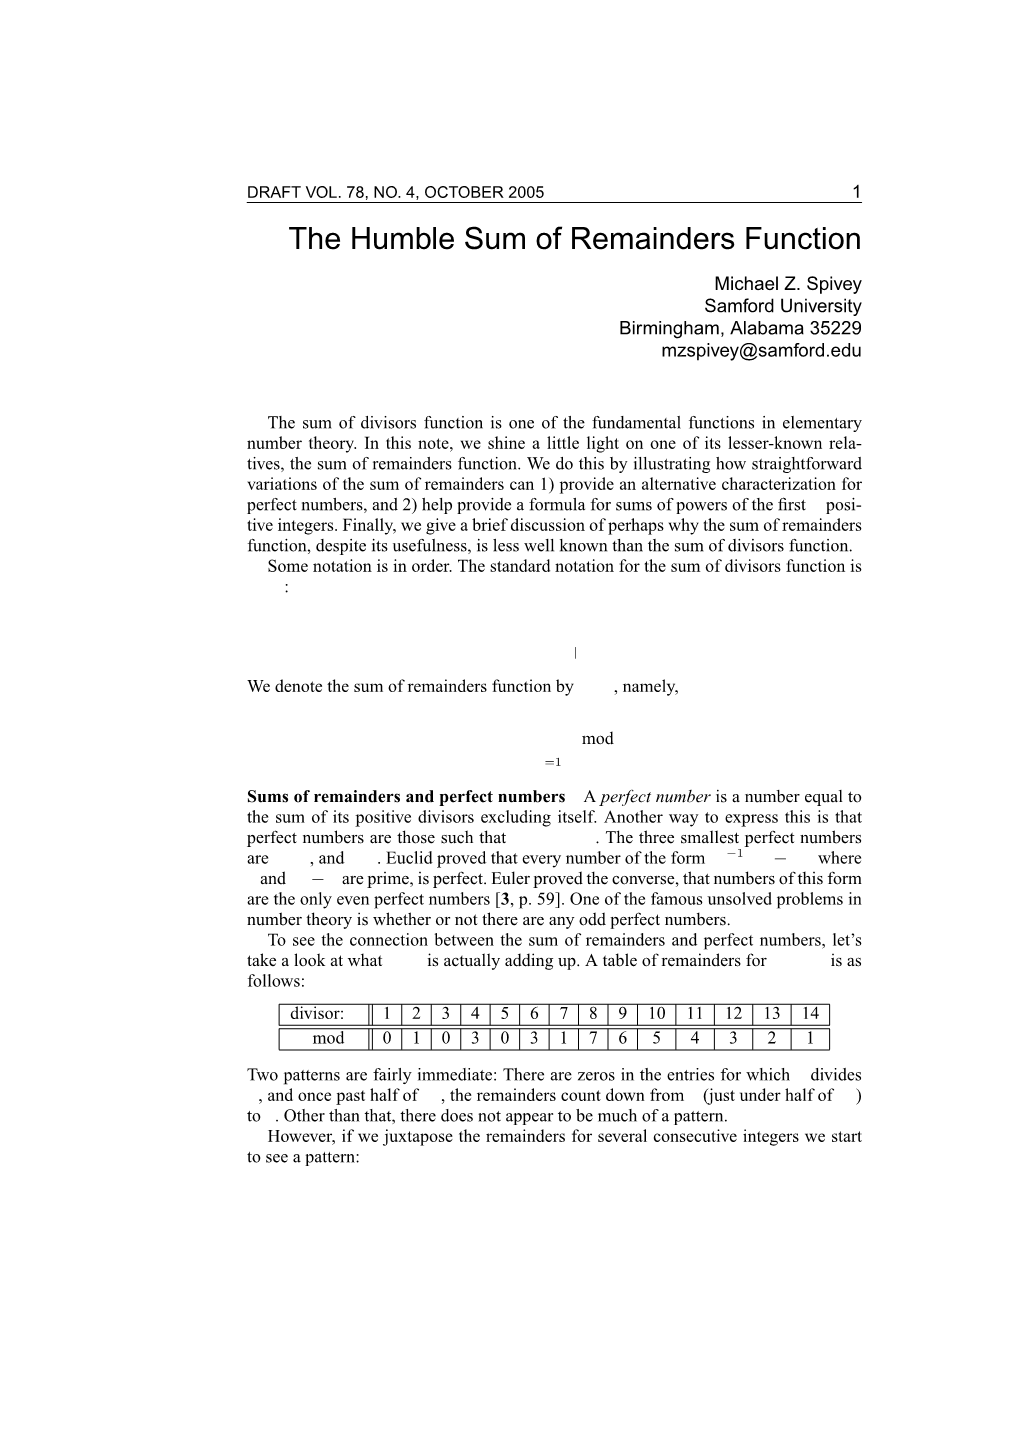 The Humble Sum of Remainders Function